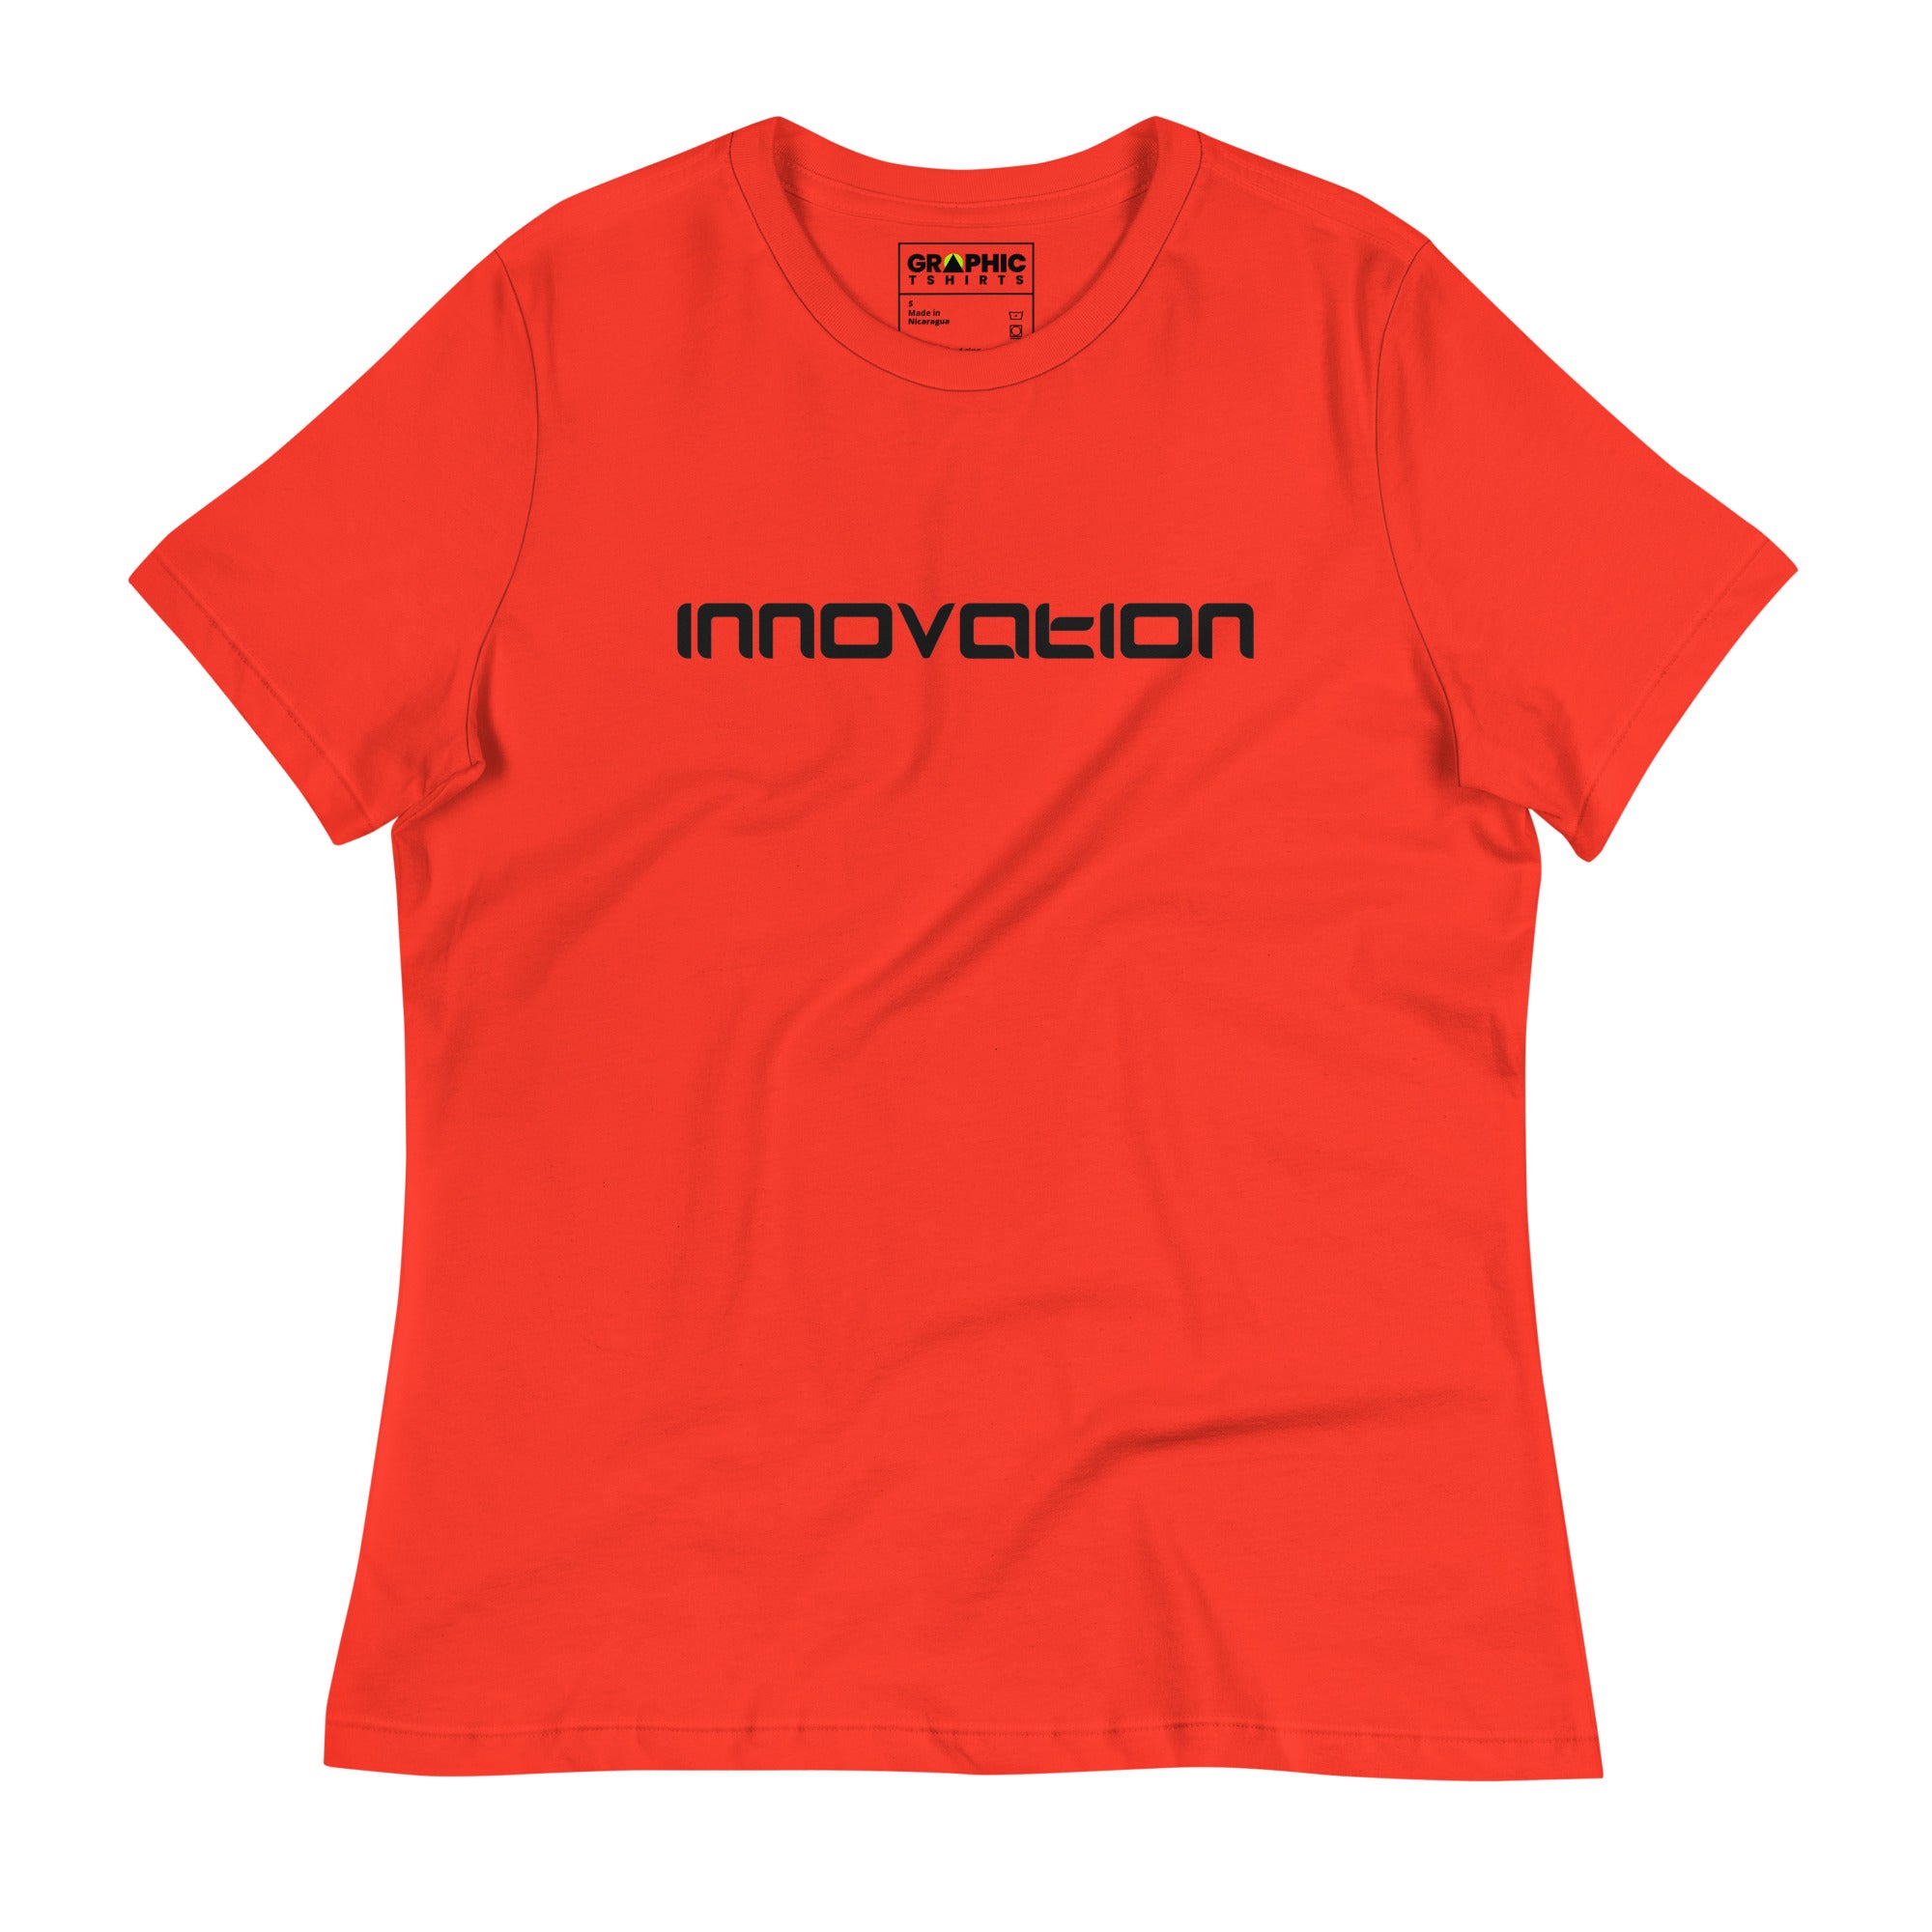 Women's Relaxed T-Shirt - Innovation - GRAPHIC T-SHIRTS